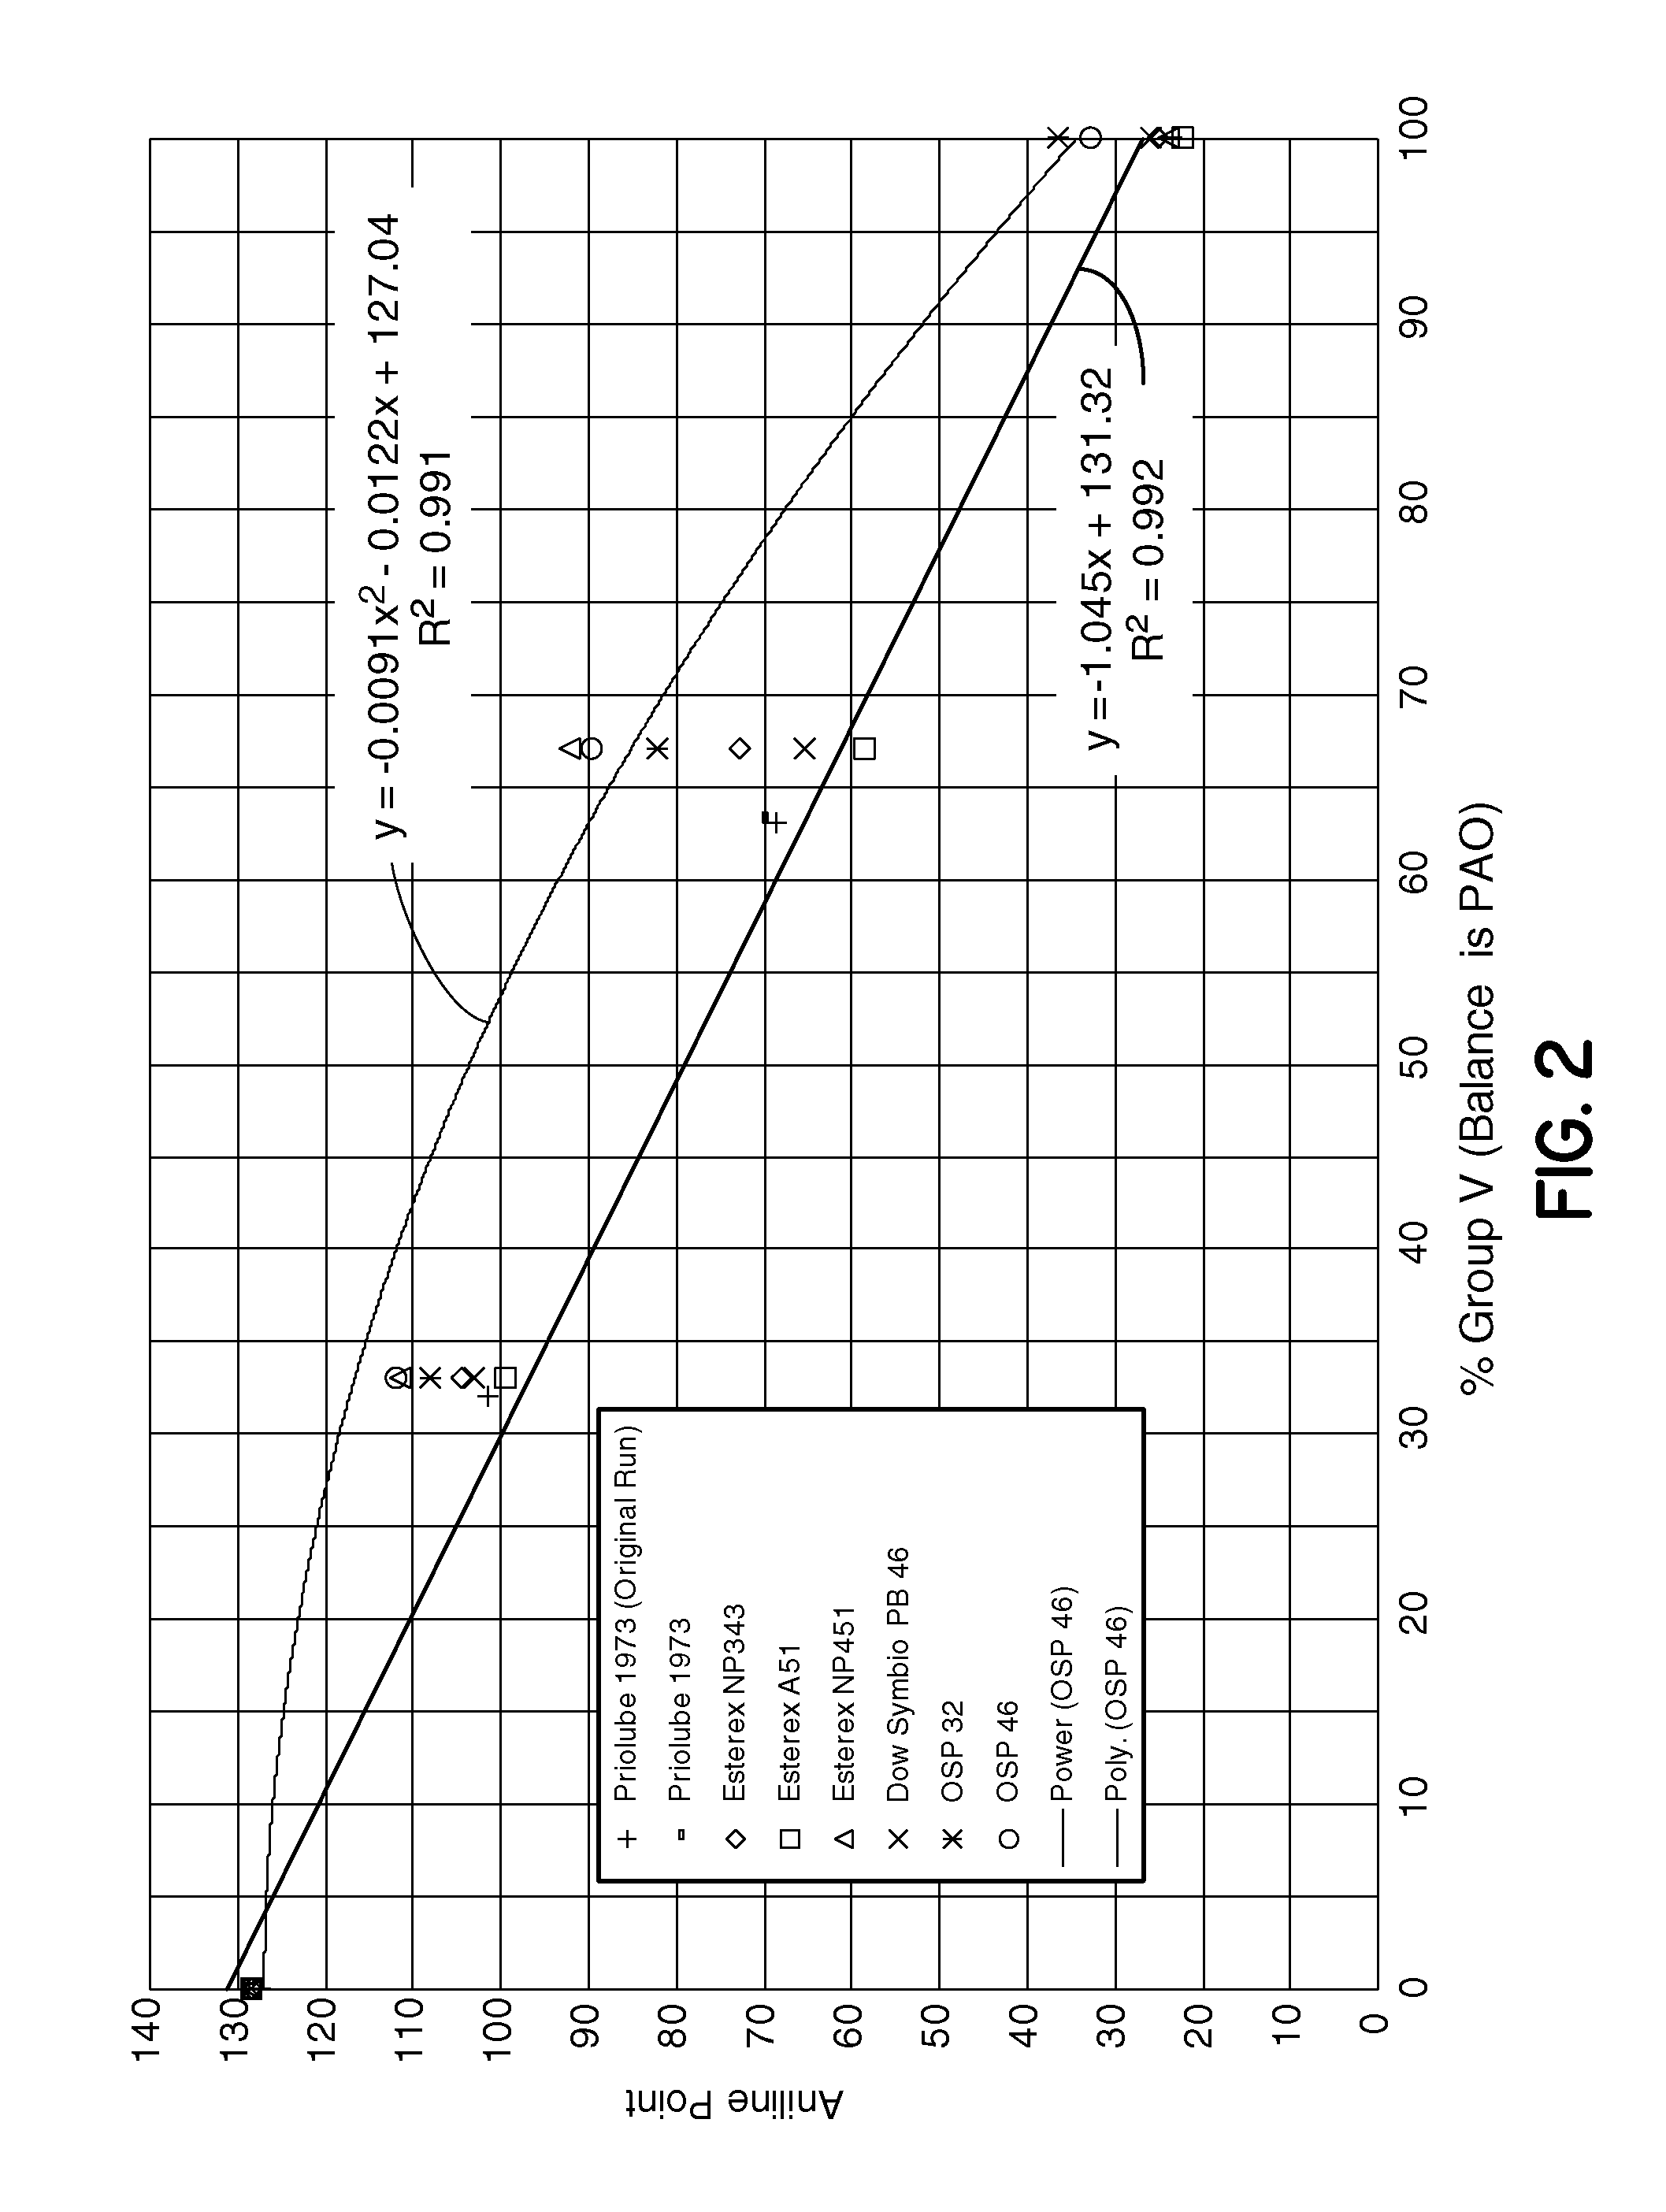 Lubricant for preventing and removing carbon deposits in internal combustion engines